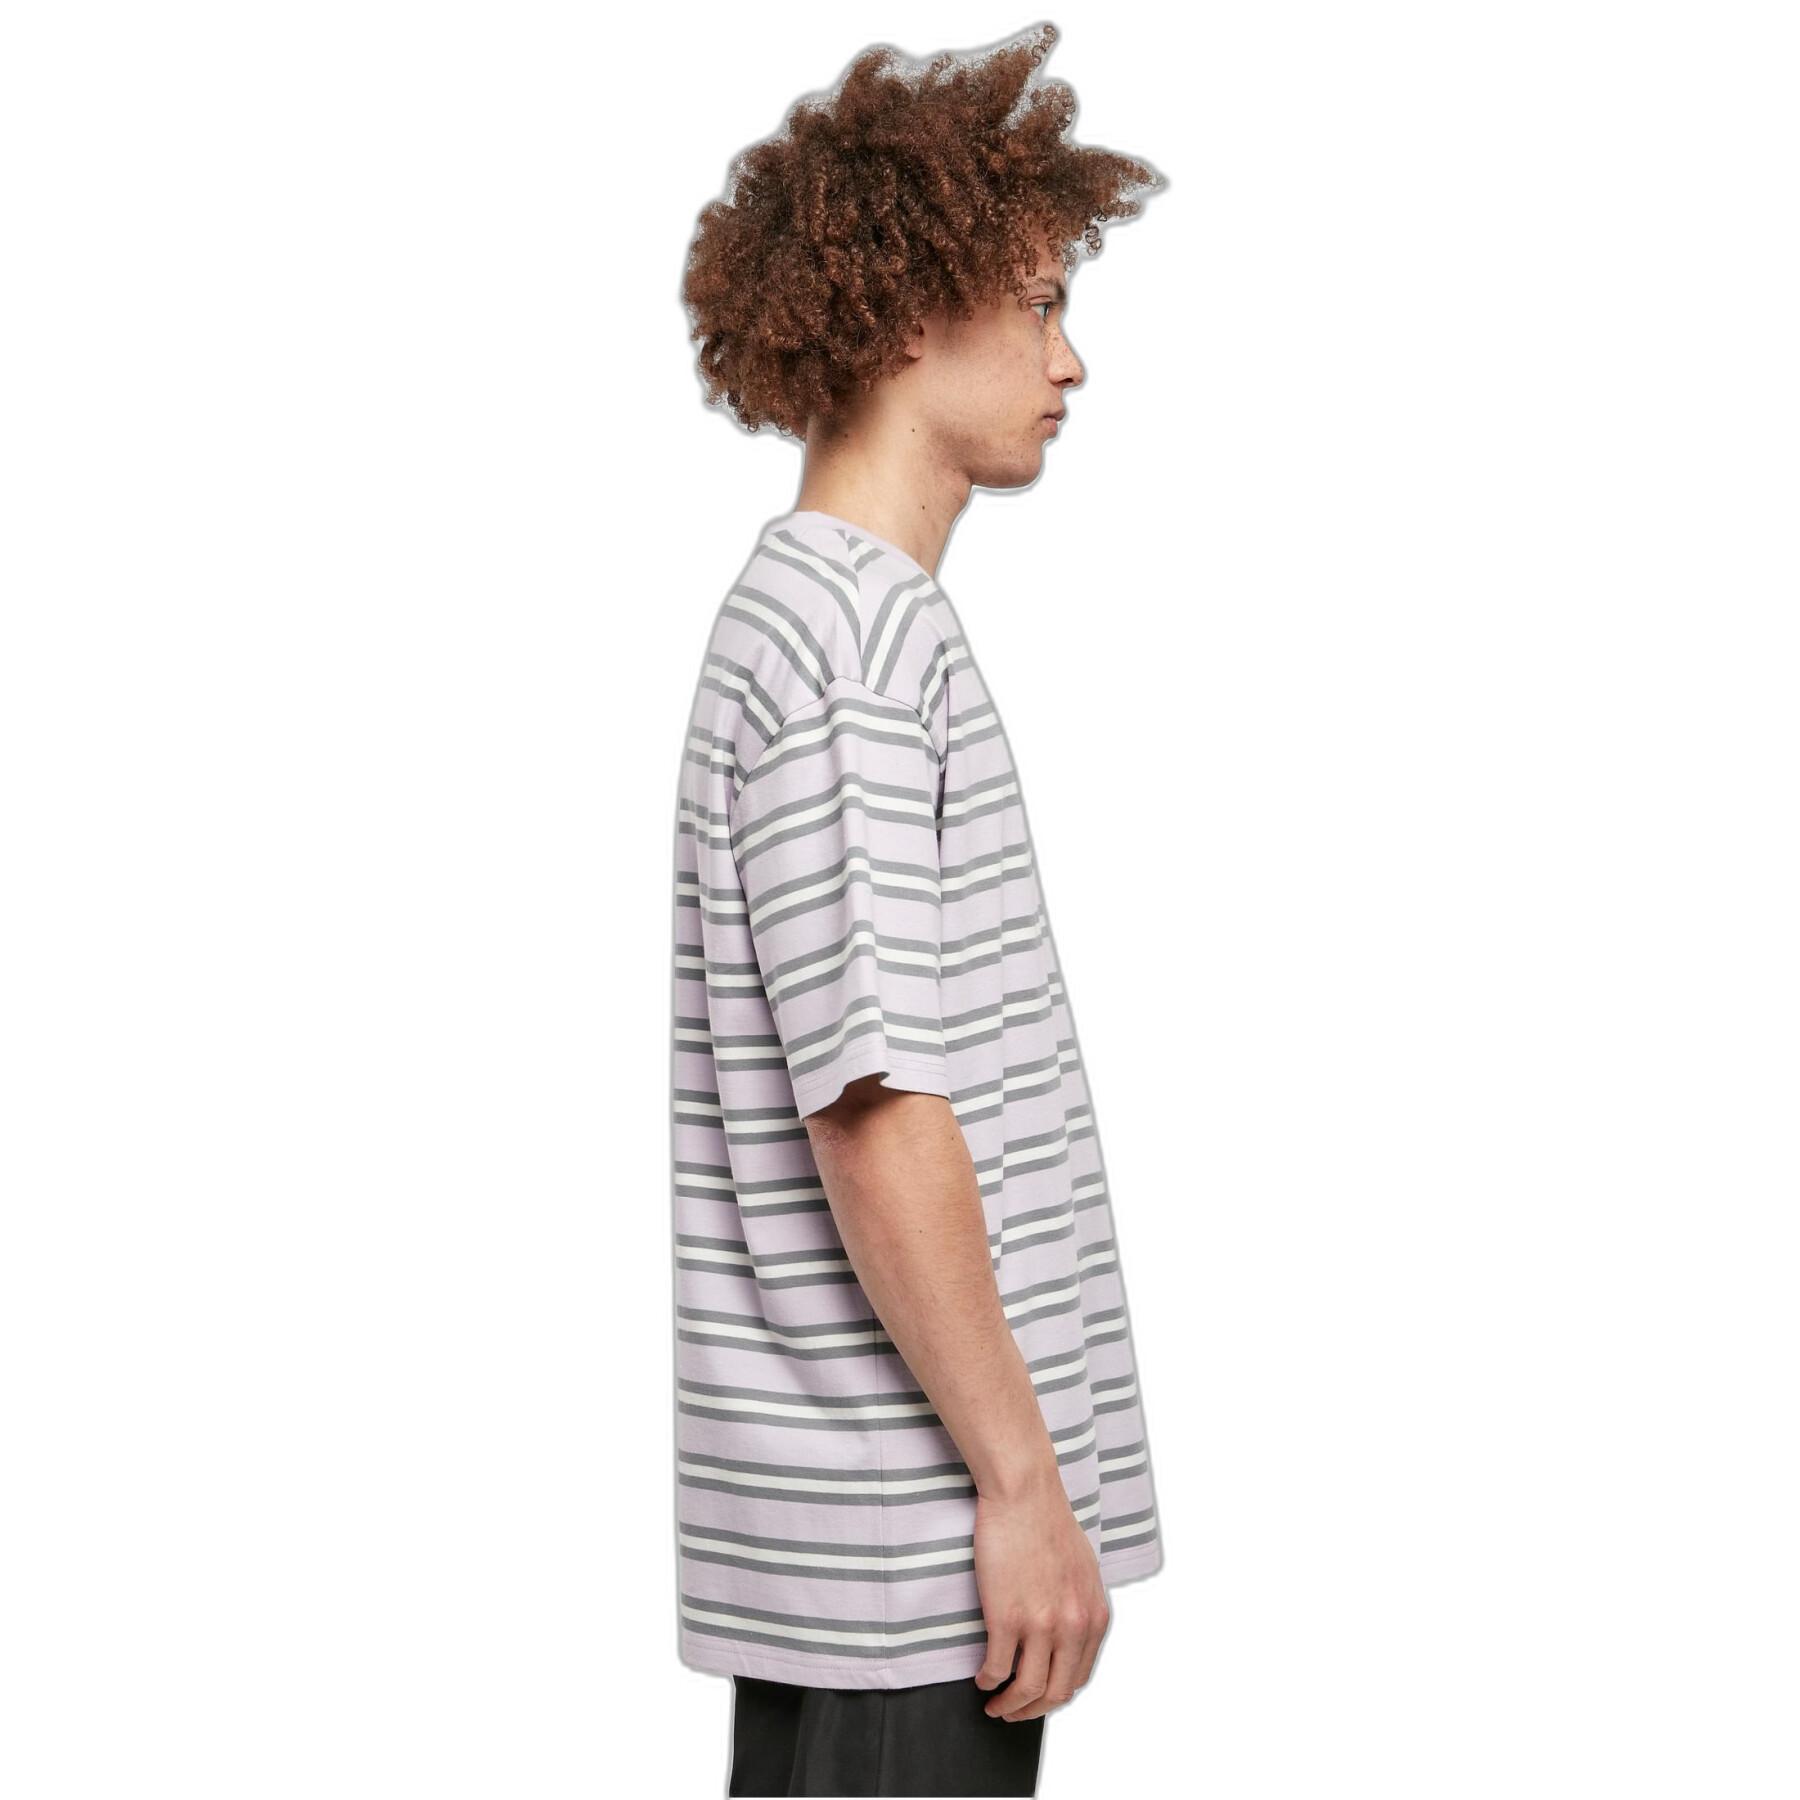 T-shirt oversize rayé Starter Look for the Star